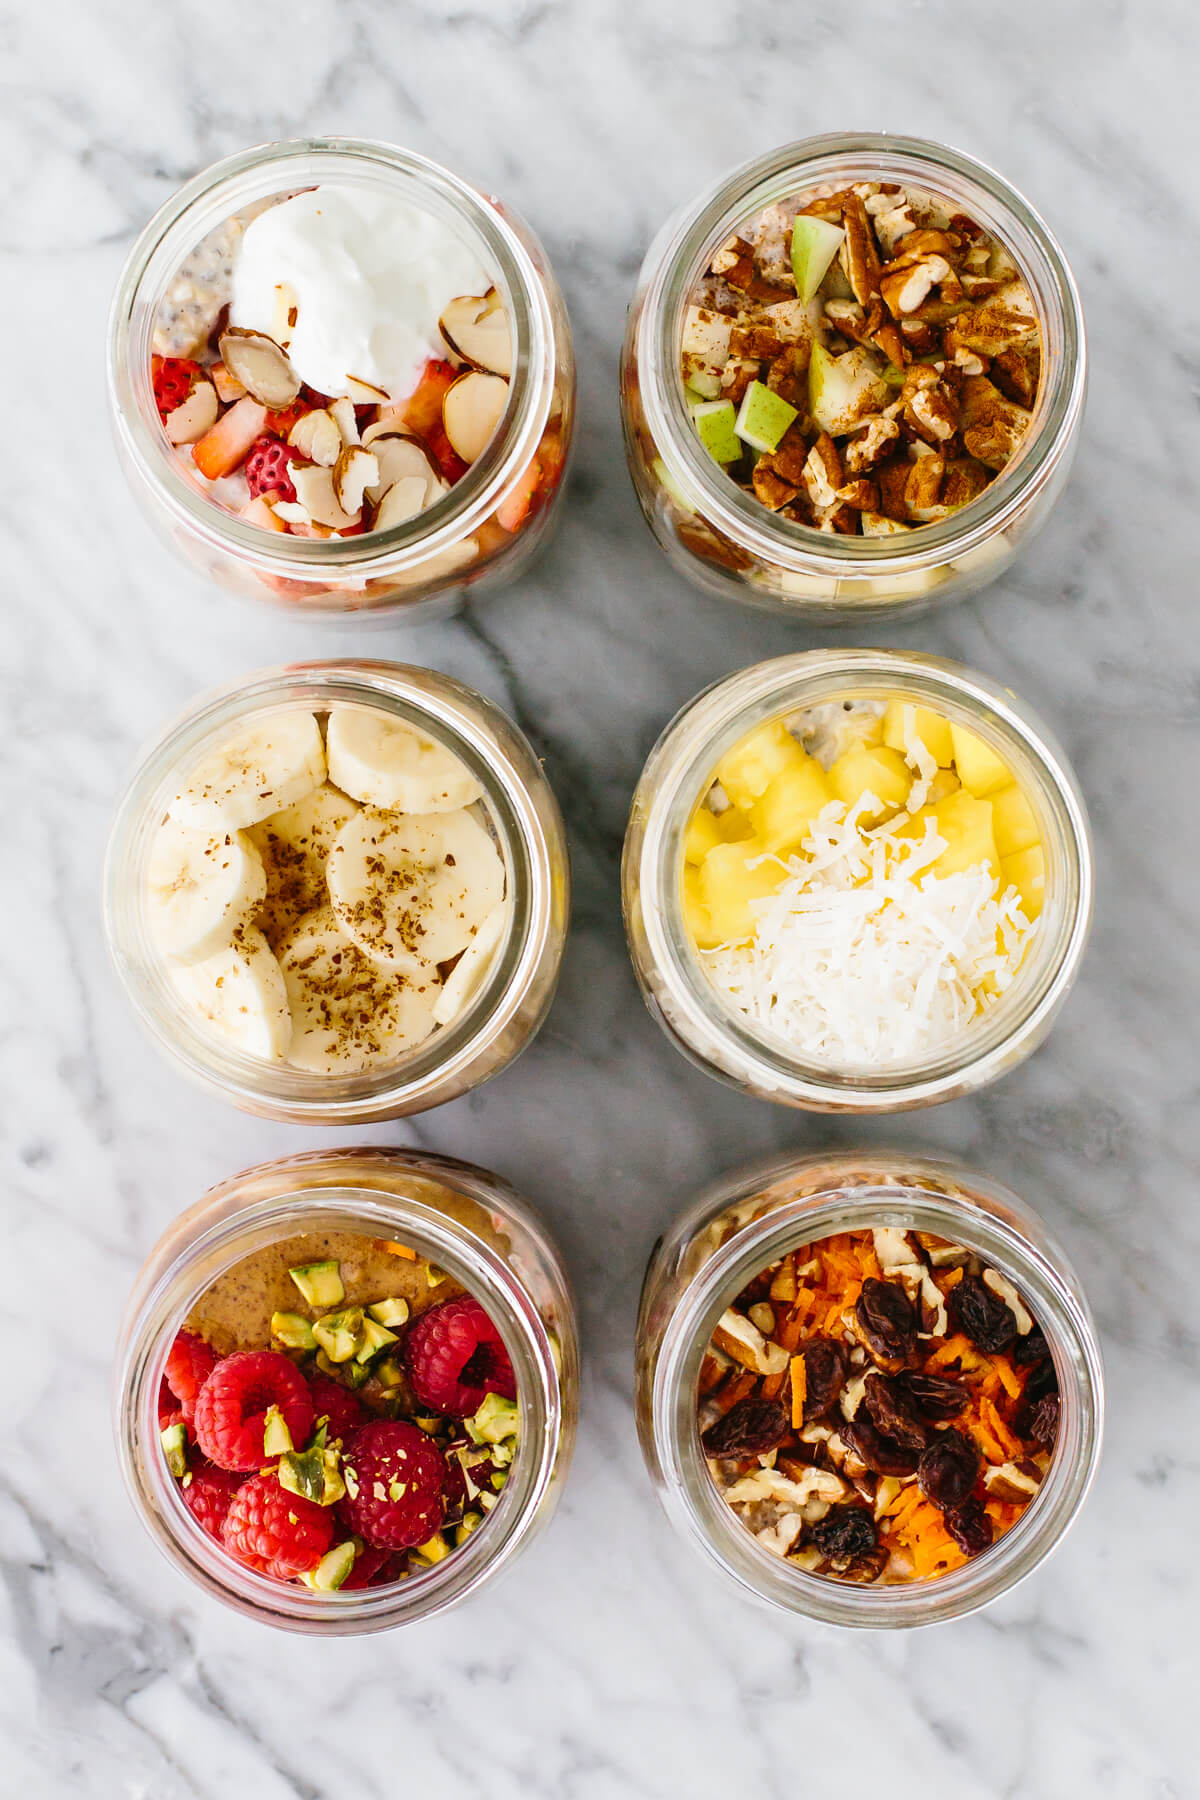 Overnight oats with different flavors in jars on a table.